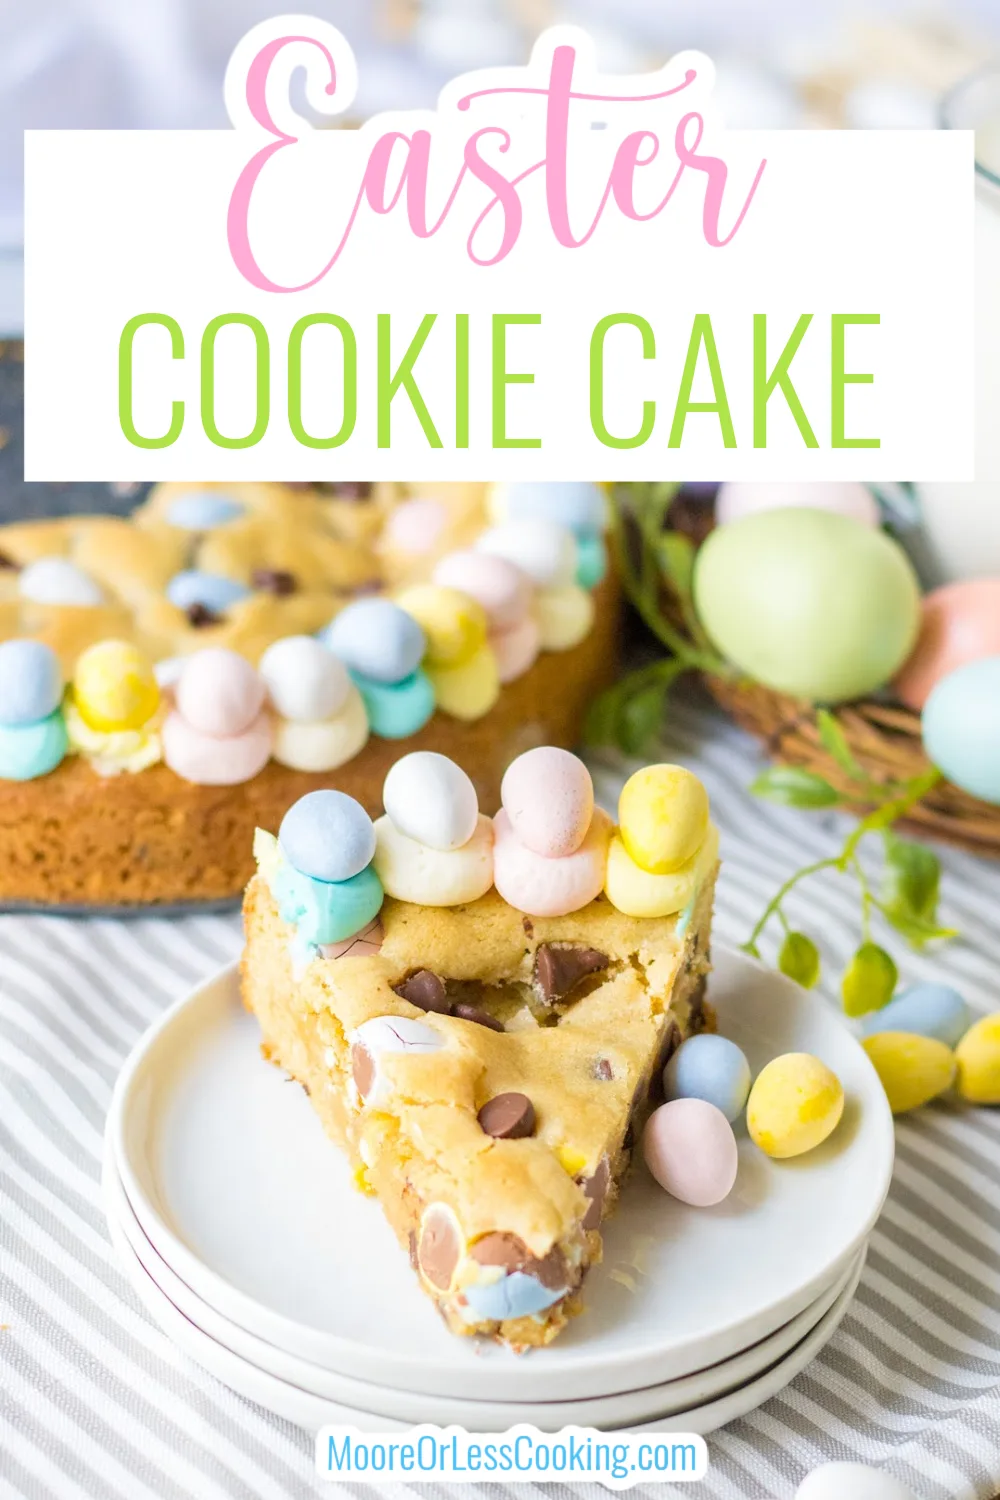 Perfect for any spring-themed event, kid's parties, baby showers, or where pastel shades would brighten the festivities, this Easter Cookie Cake is guaranteed to be a hit. via @Mooreorlesscook